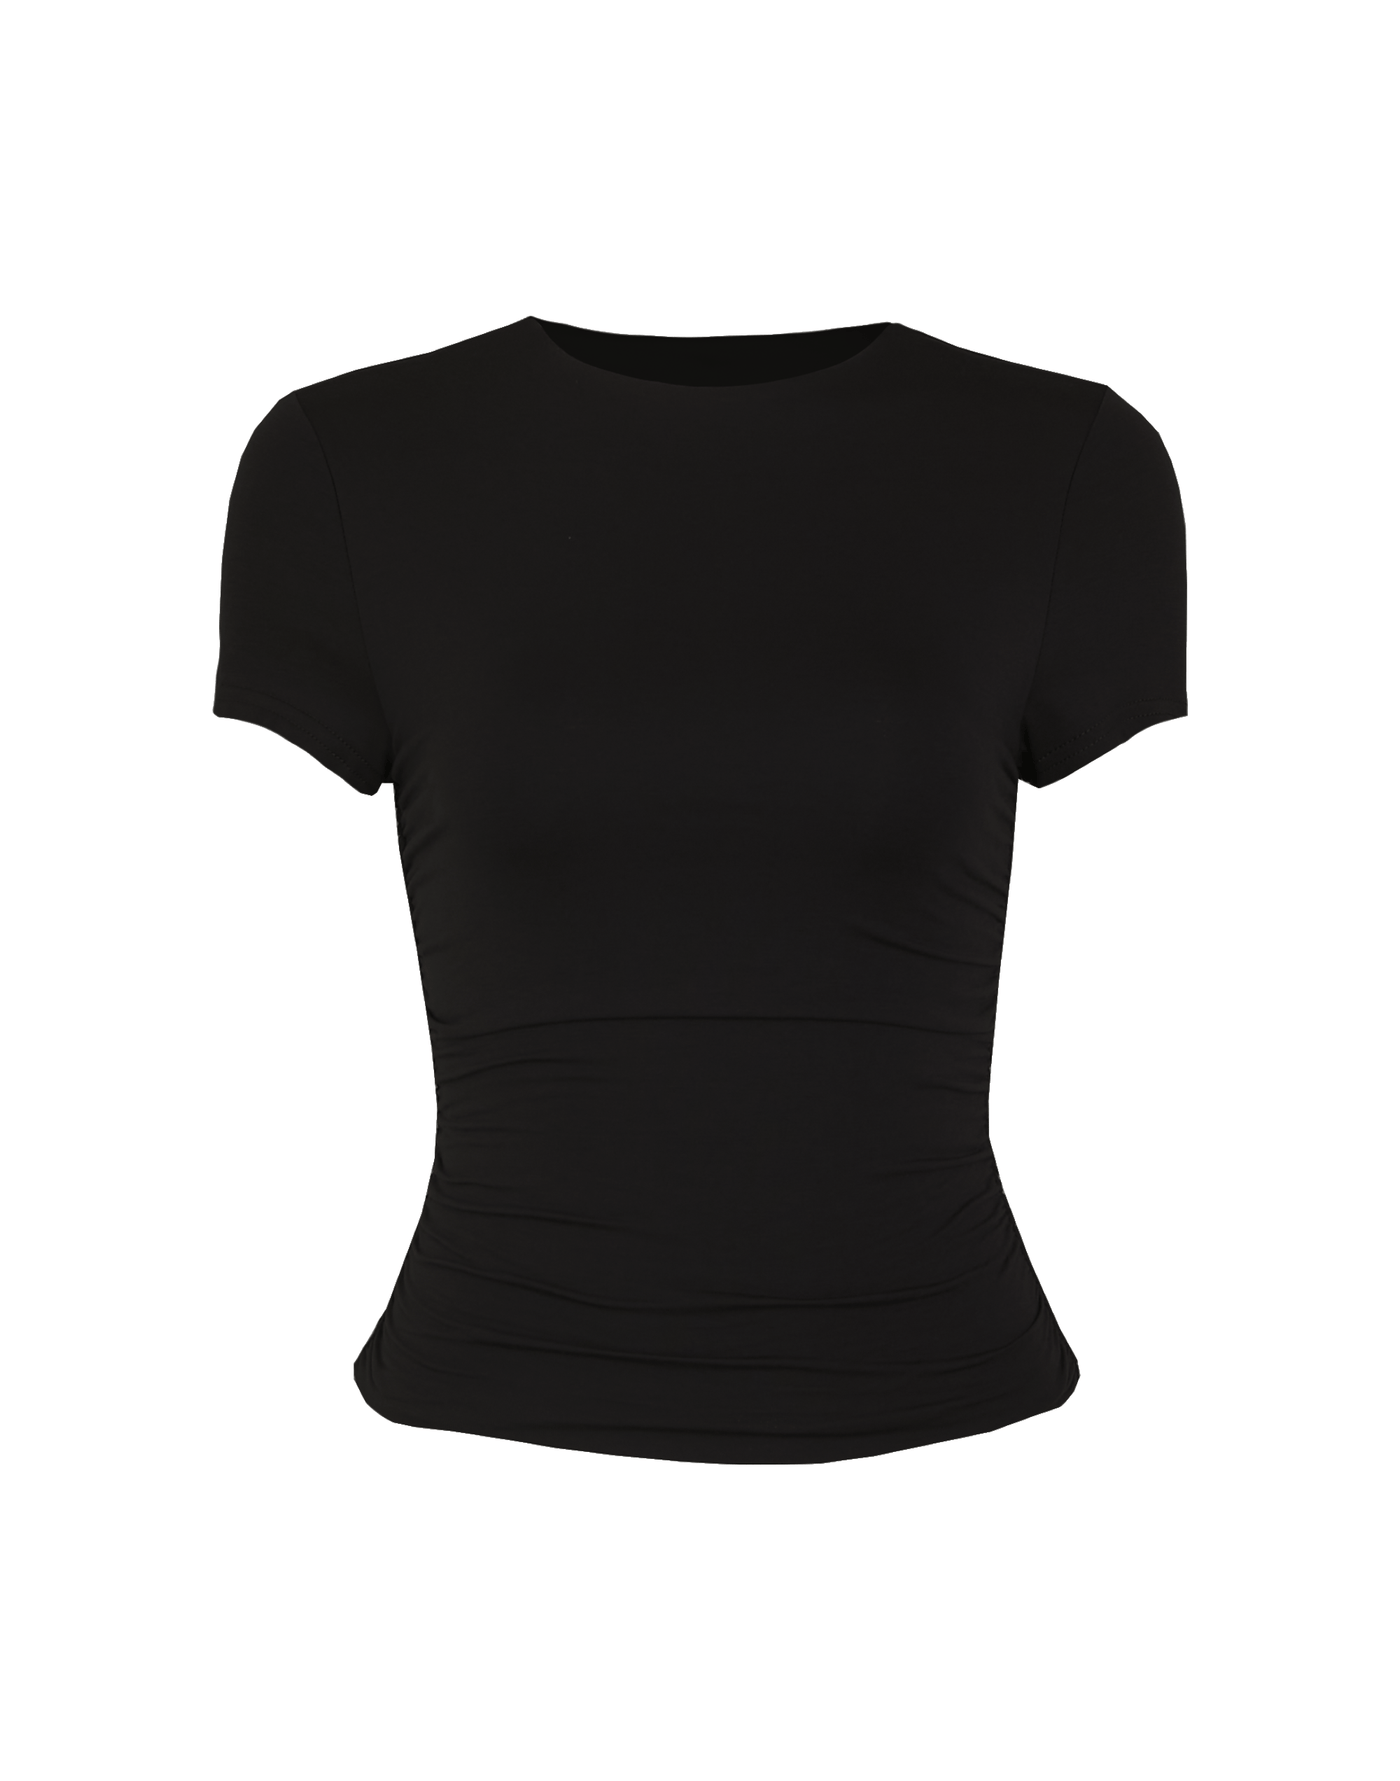 Complicated Top (Black) - Black Gathered Jersey Baby Tee - Women's Top - Charcoal Clothing